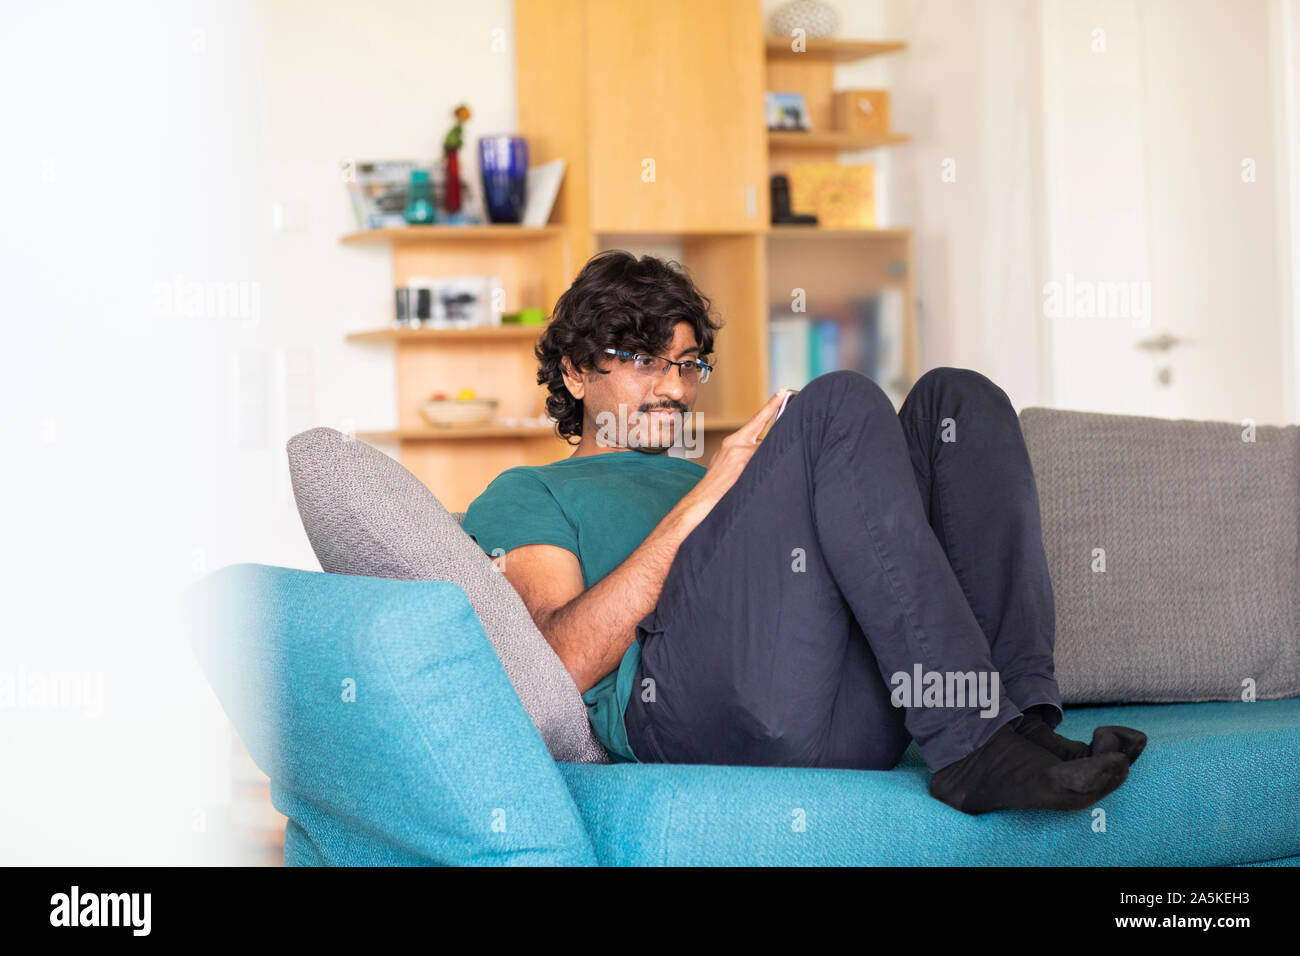 Mid adult man relaxing on sofa looking at smartphone Stock Photo